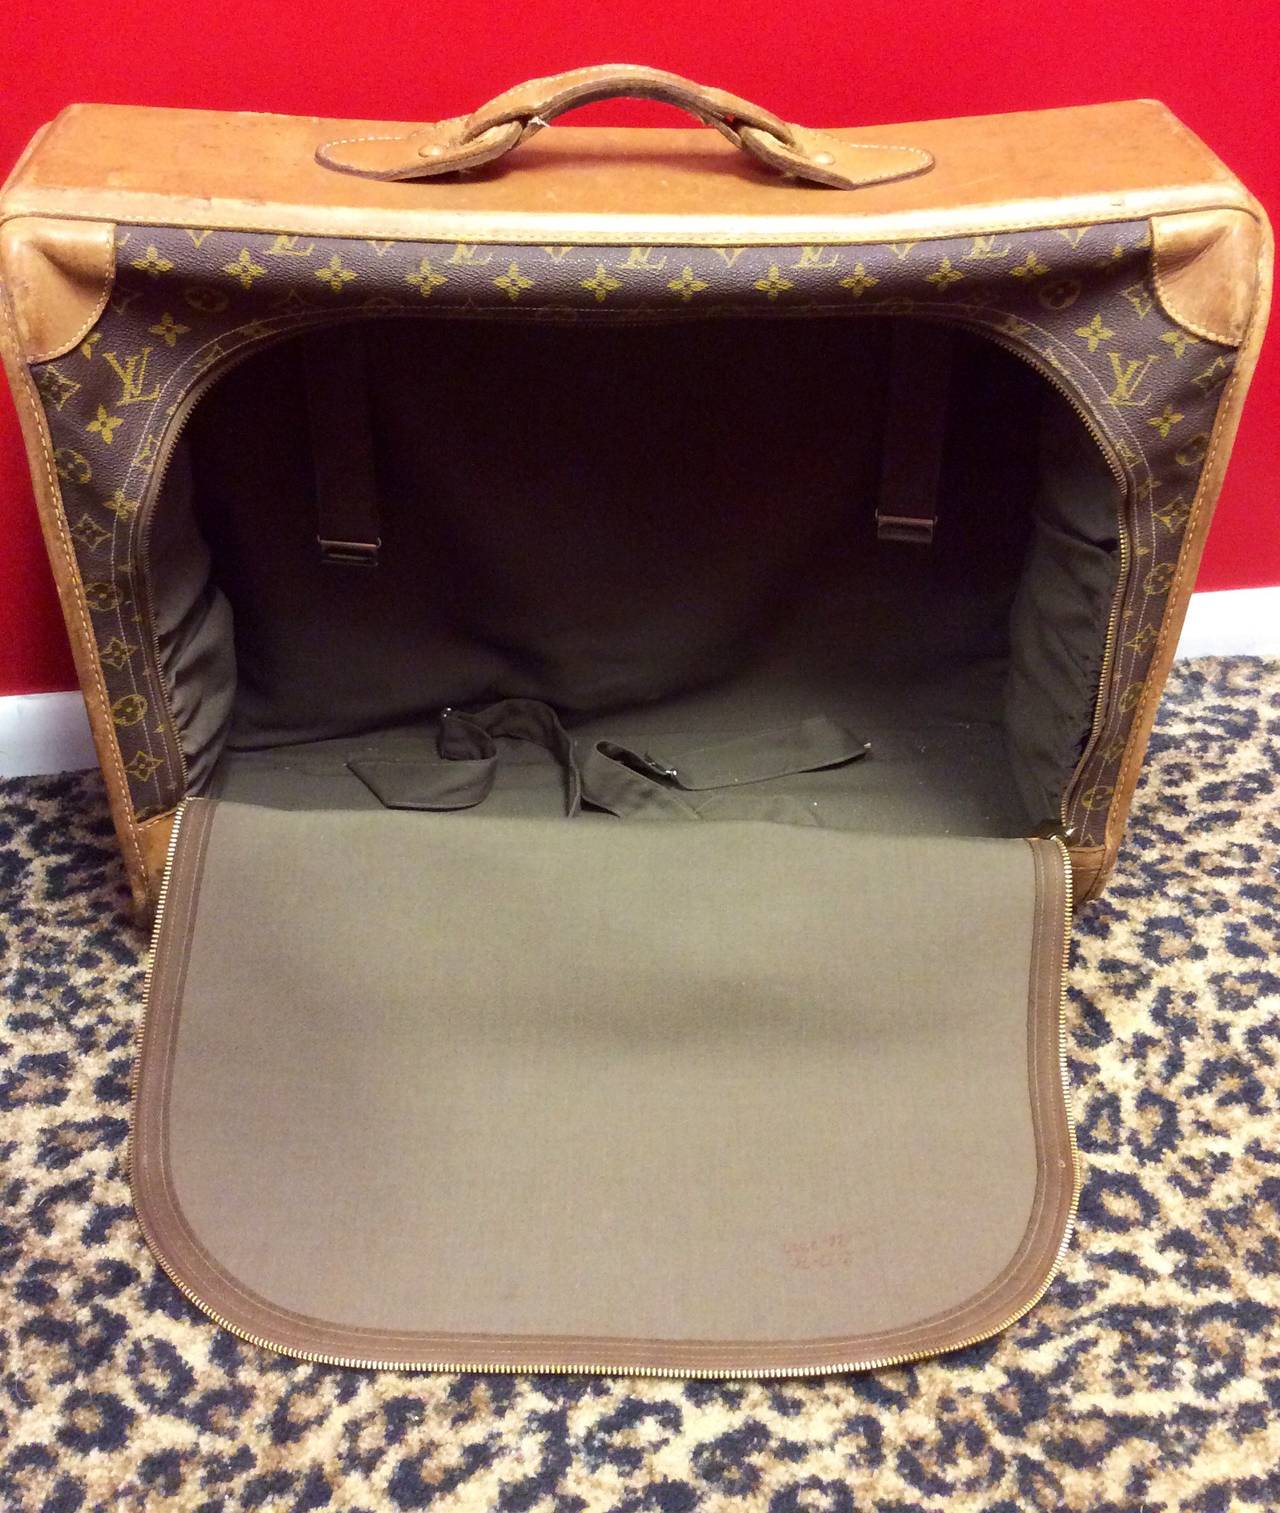 Sold at Auction: LOUIS VUITTON FRENCH COMPANY MONOGRAM SUITCASE